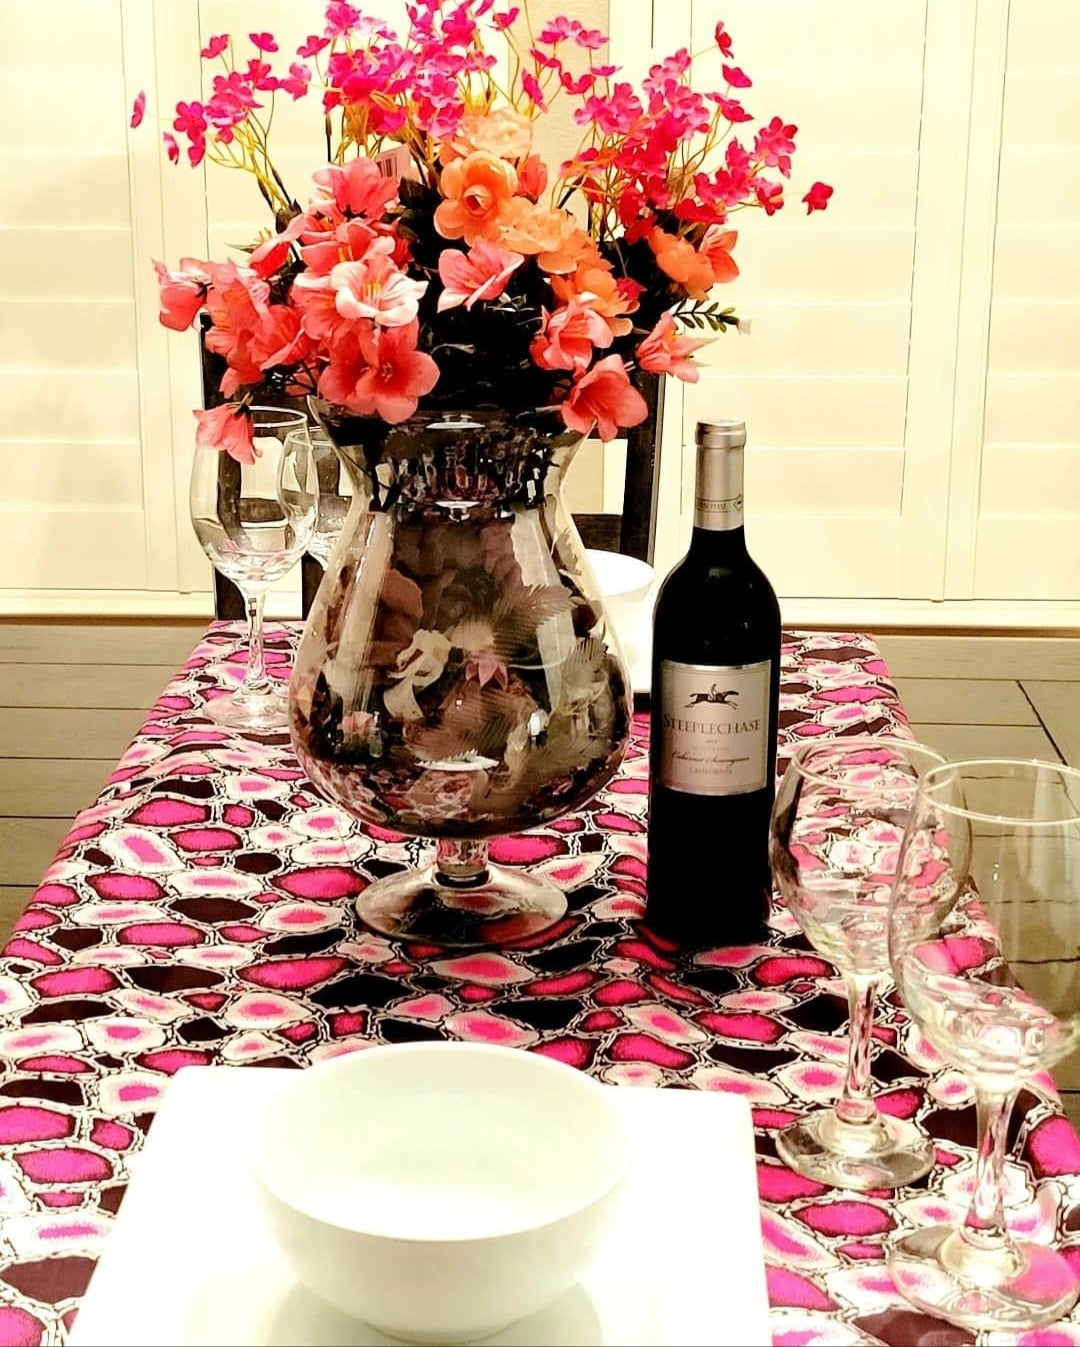 Dimoh Table Runner with matching napkins